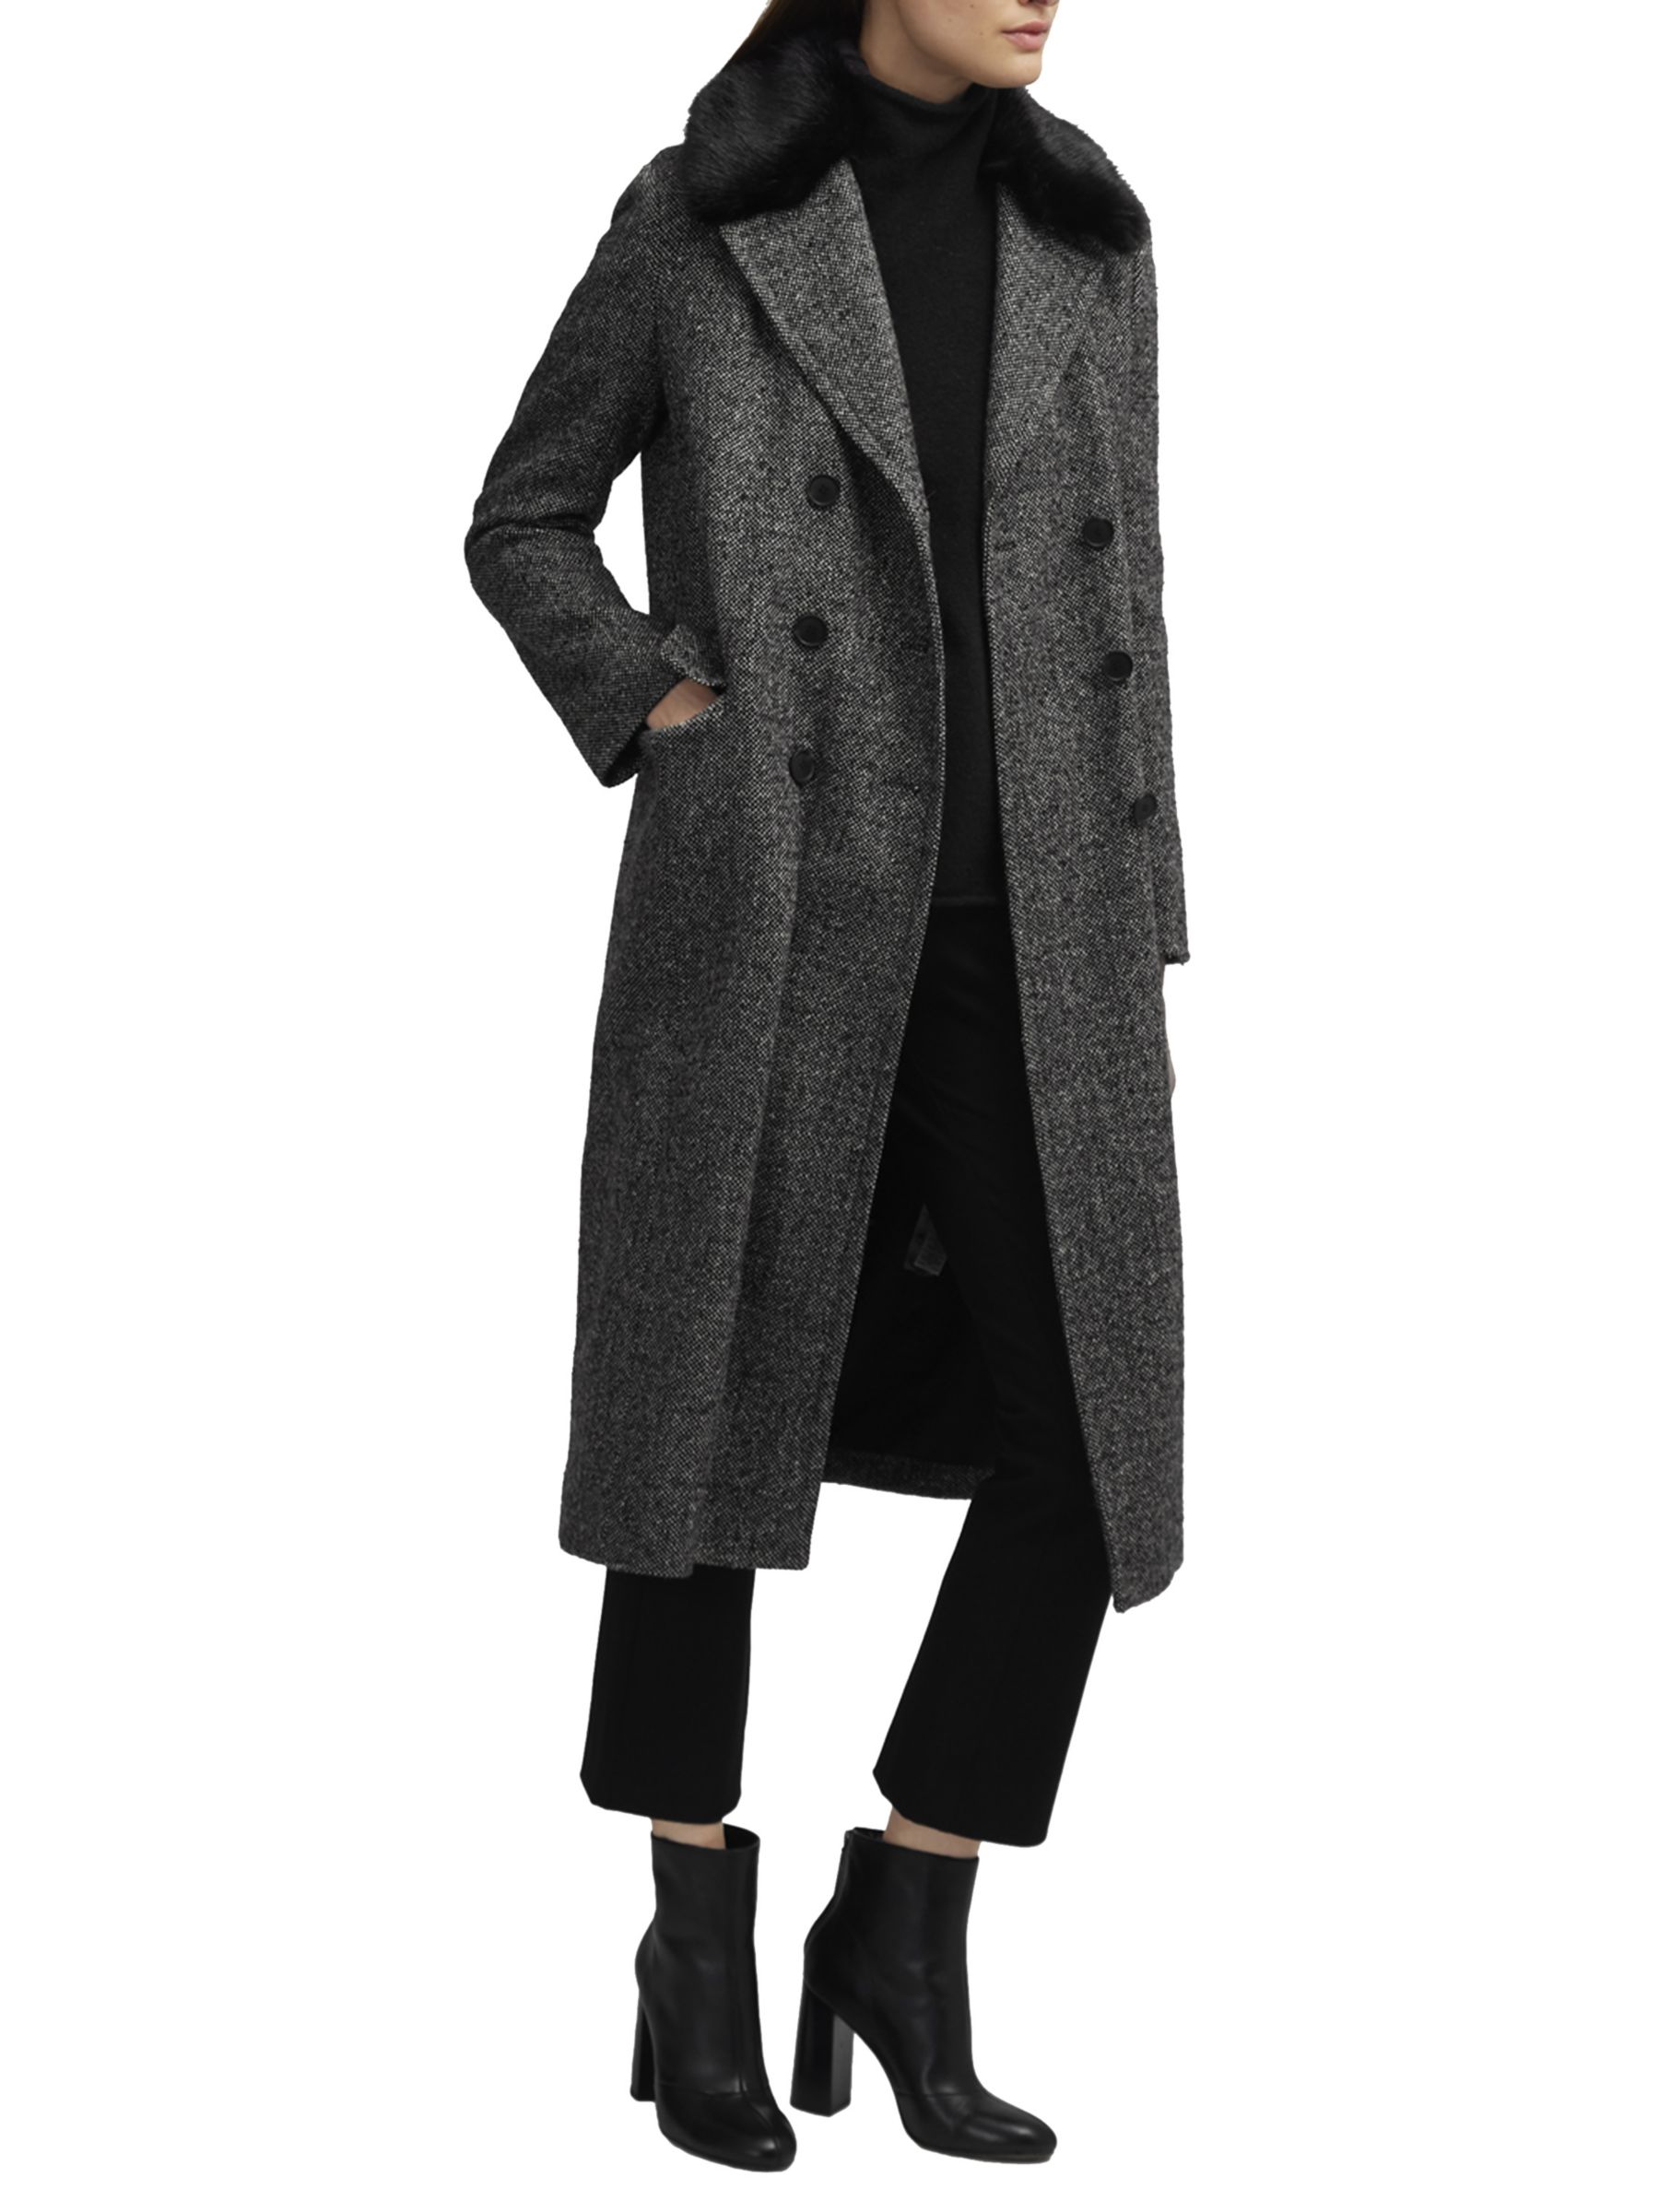 French Connection Rupert Tweed Double Breasted Coat, Black/White